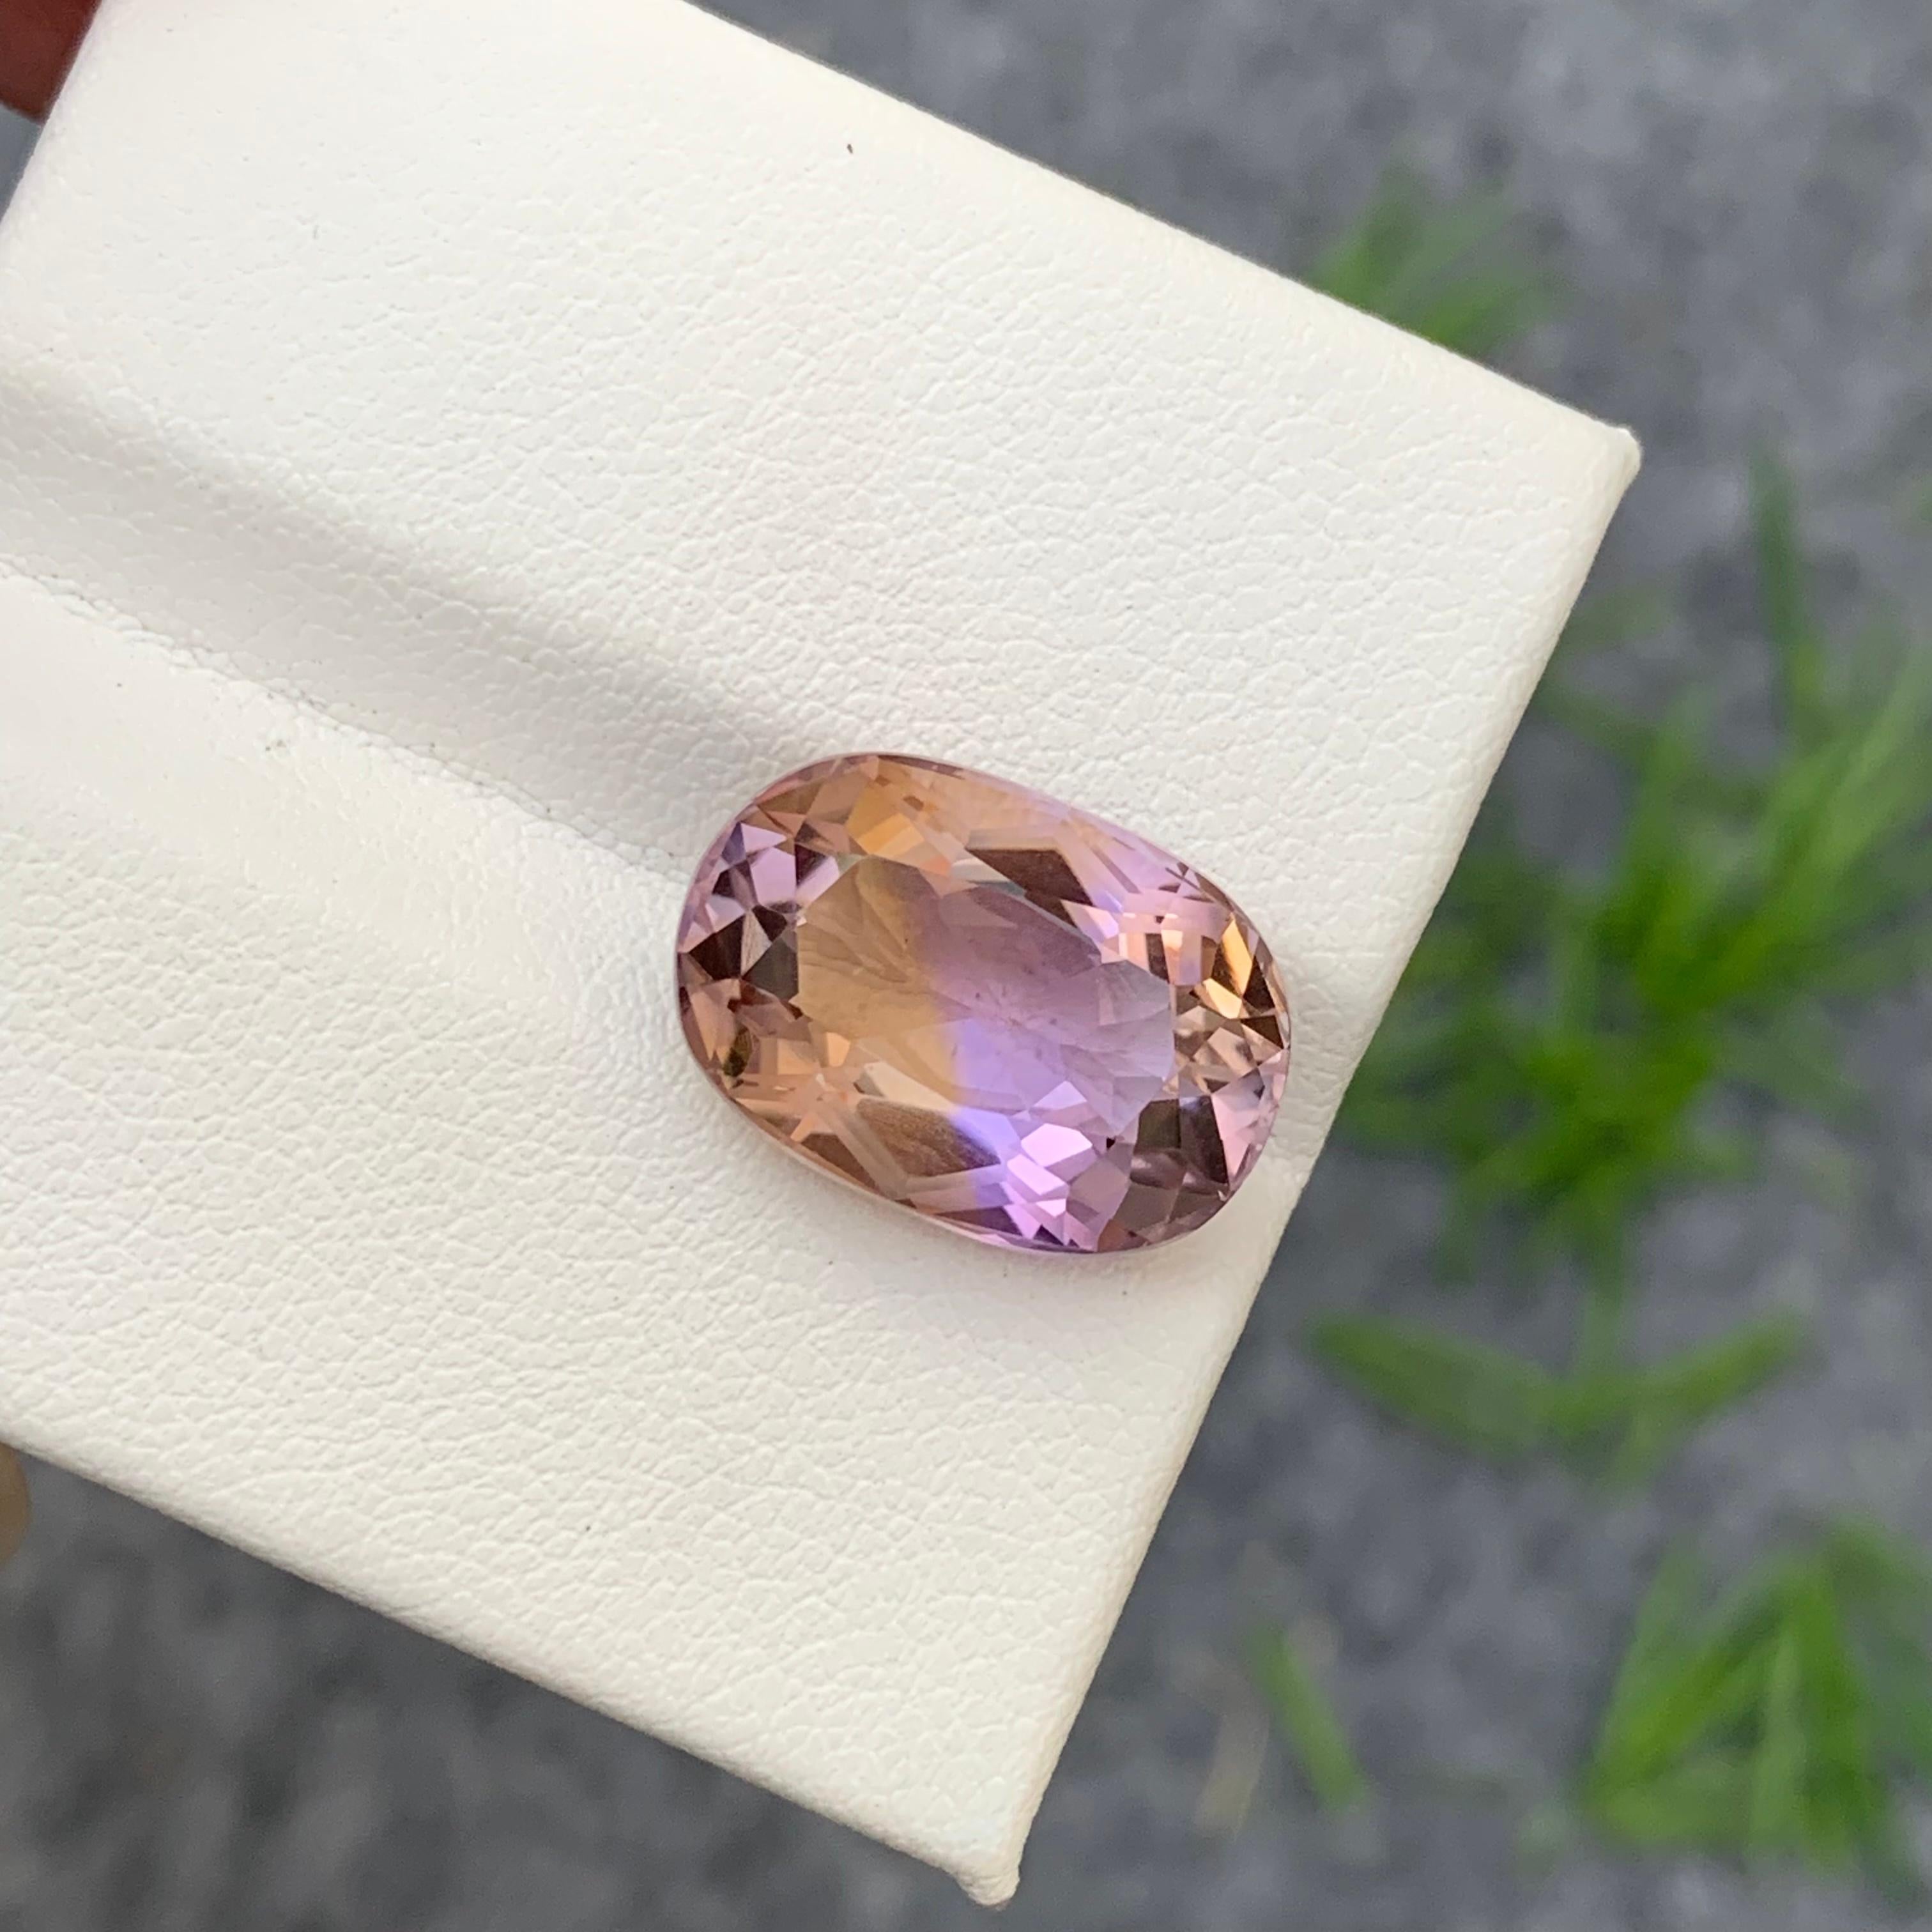 Faceted Ametrine 
Weight: 9.95 Carats 
Dimension; 16.1x11.3x8.6 Mm
Origin: Brazil
Color: Purple & Yellow 
Shape: Oval
Treatment: Non
Certficate: On Demand 
.
Ametrine is a unique and captivating gemstone that displays a harmonious blend of two